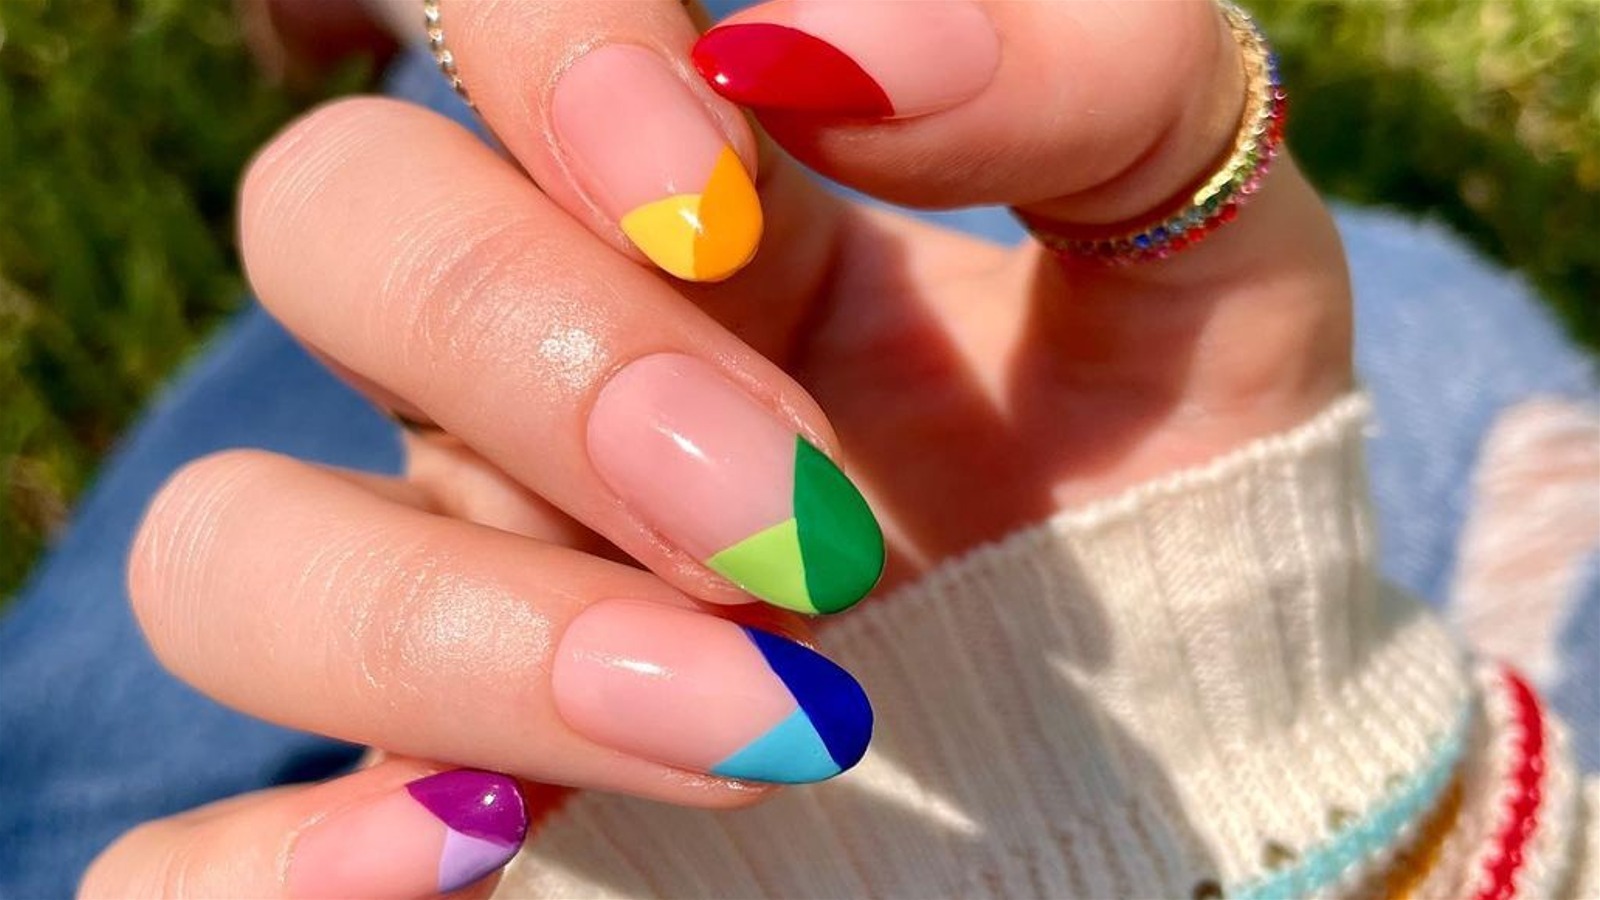 15 Dope Designs That'll Make You Want to Try Matte Nail Art